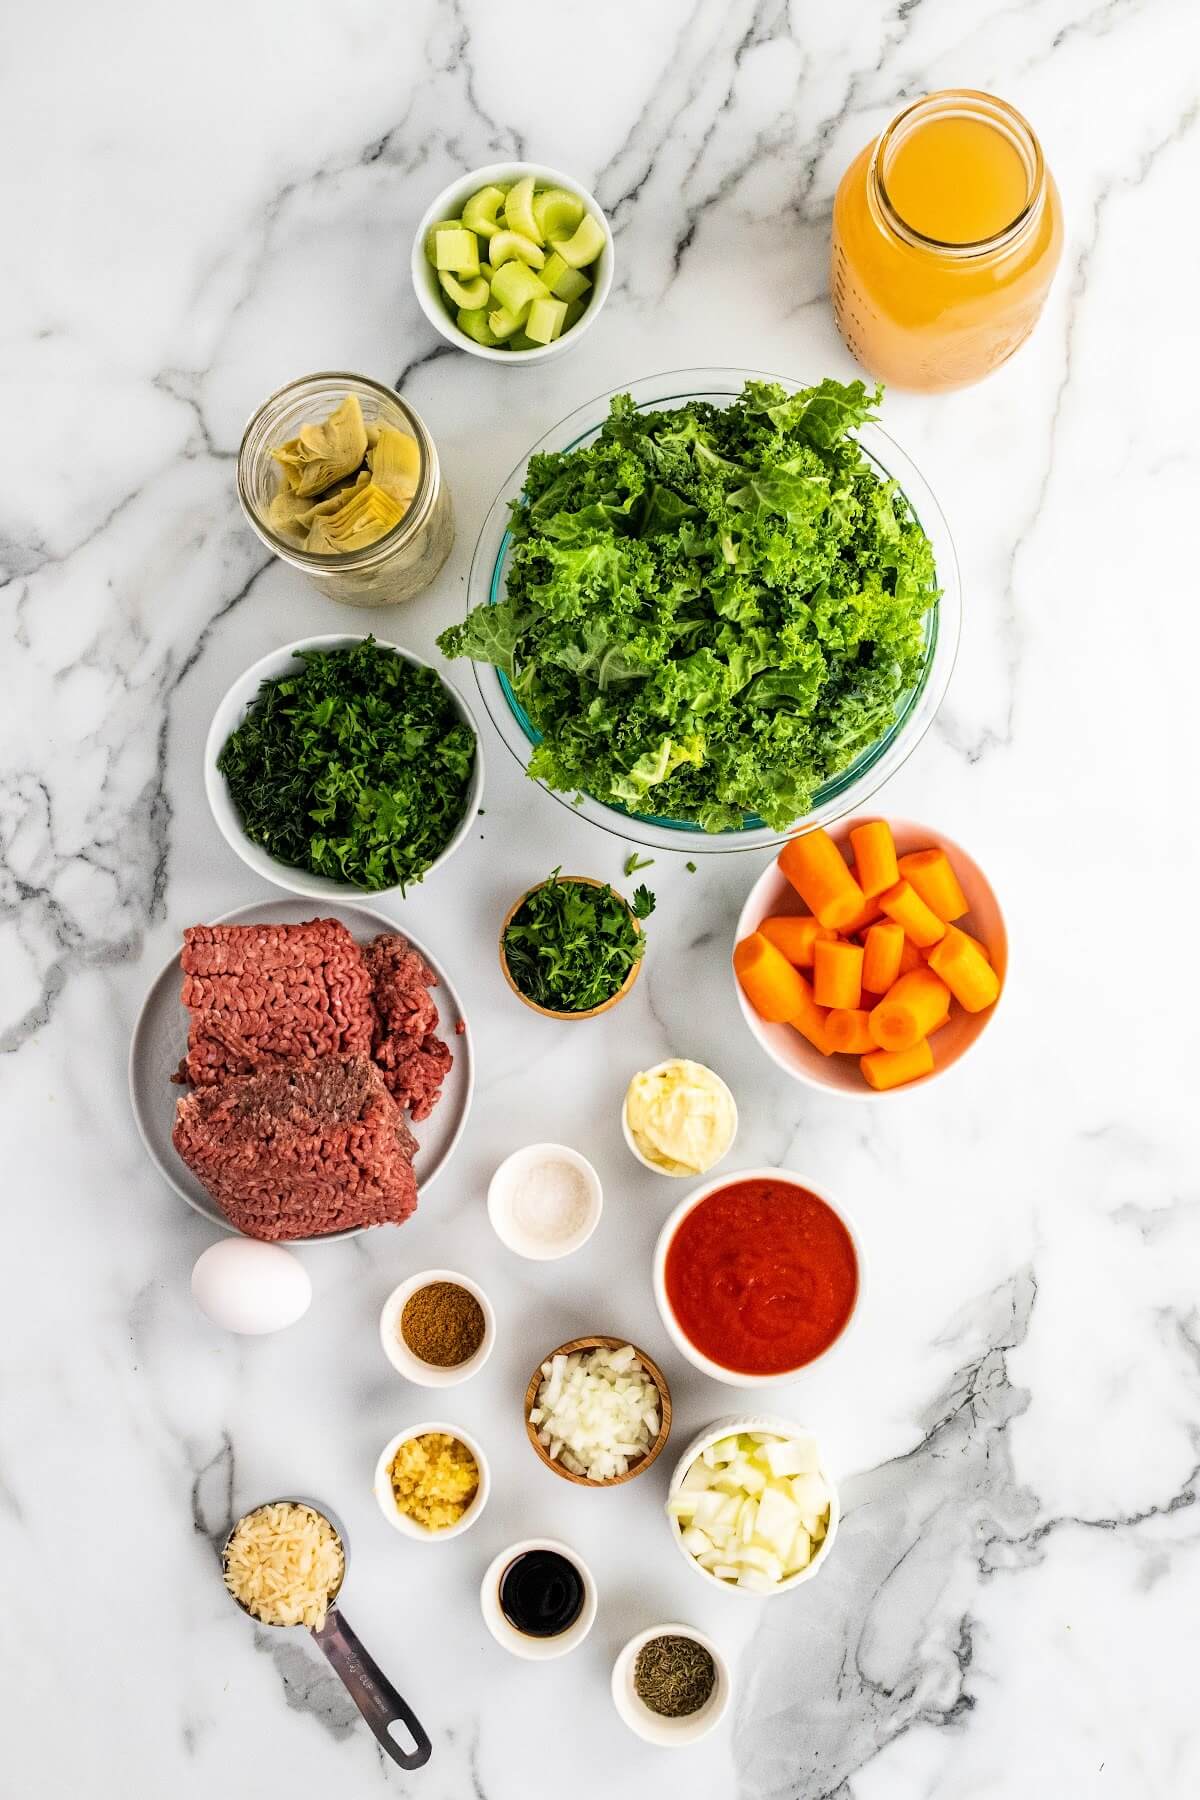 Overhead shot of ingredients - a glass jar with broth, small bowl of chopped celery, glass jar of artichoke hearts, small bowl of chopped herbs, mini bowl of chopped herbs, glass bowl of chopped kale, small bowl of chopped carrots, small bowl of ground beef, 1 egg, small bowl of crushed tomatoes, several mini bowls of spices, chopped garlic and rice.